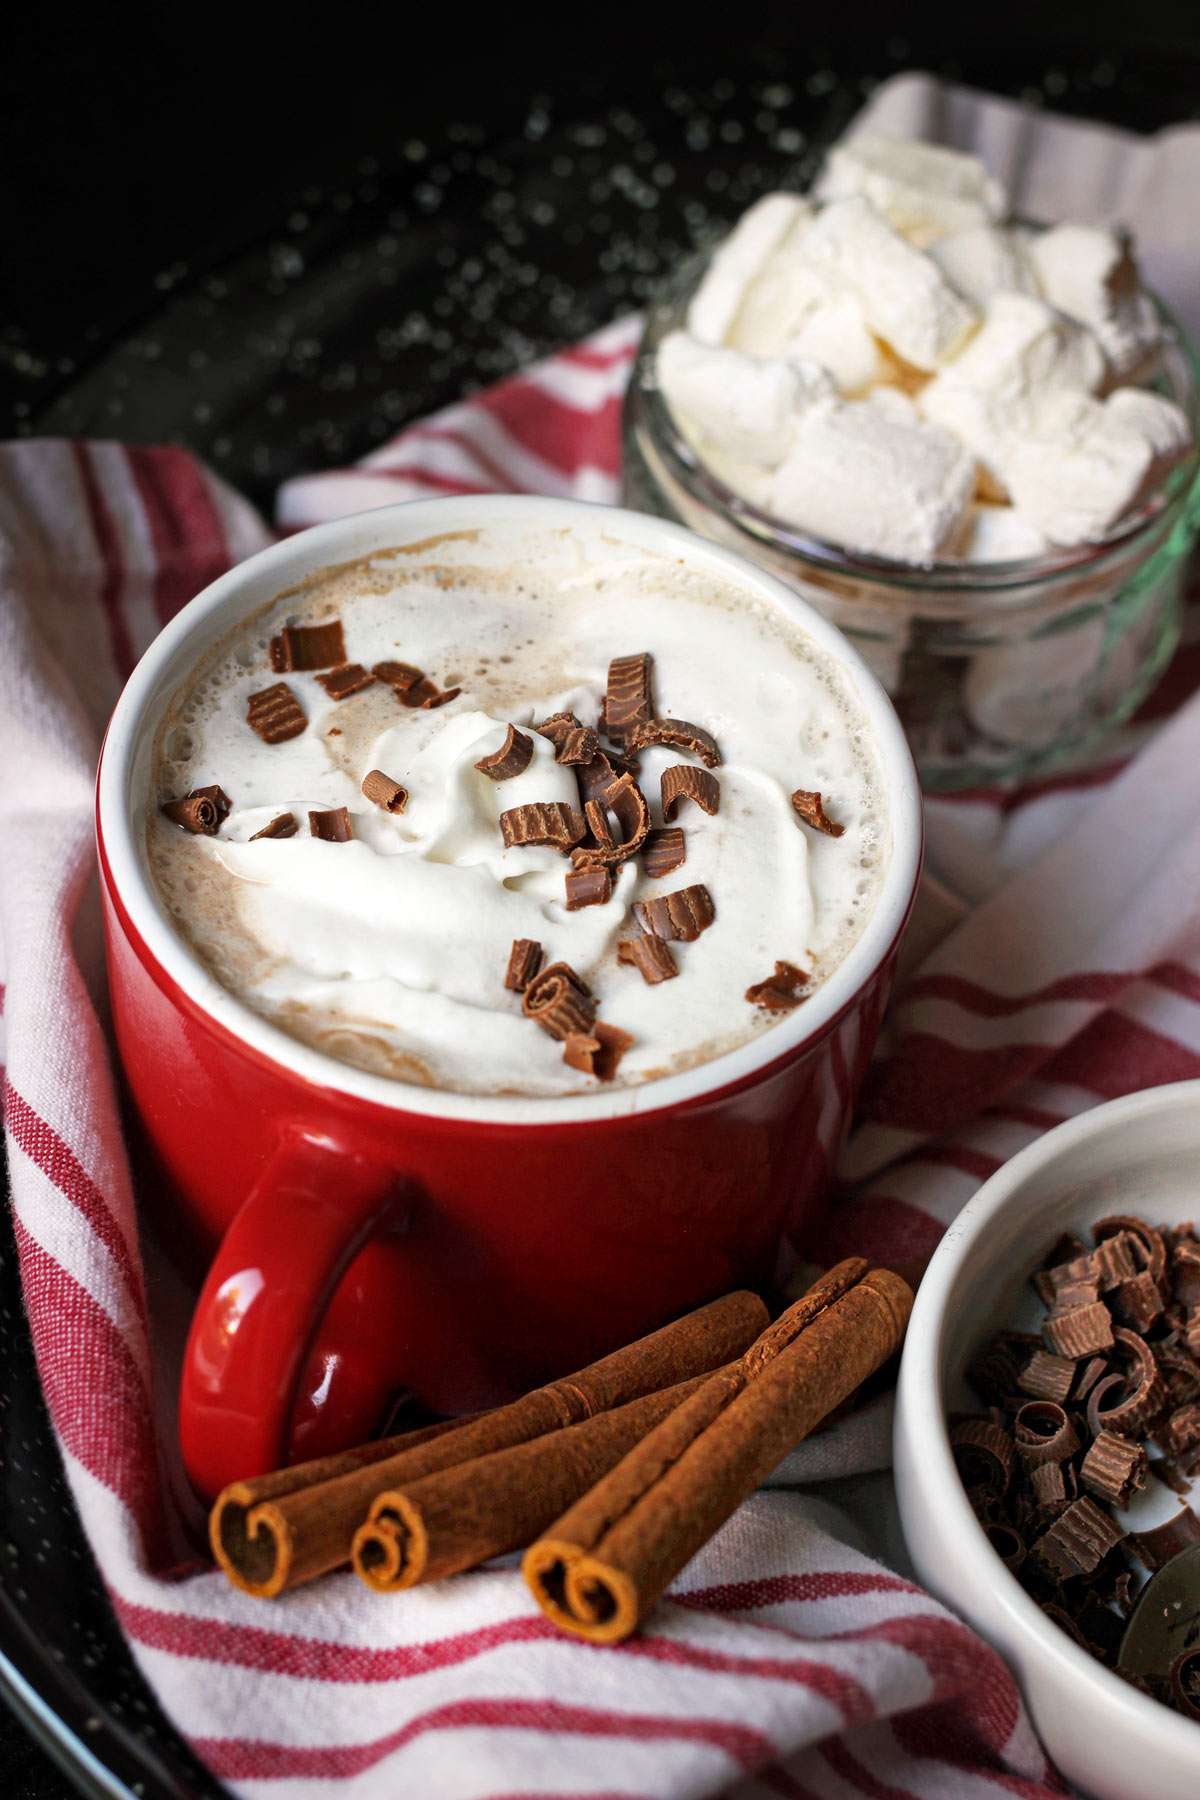 red mug of cocoa topped with whipped cream and chocolate shavings with a dish of homemade marshmallows in the background.